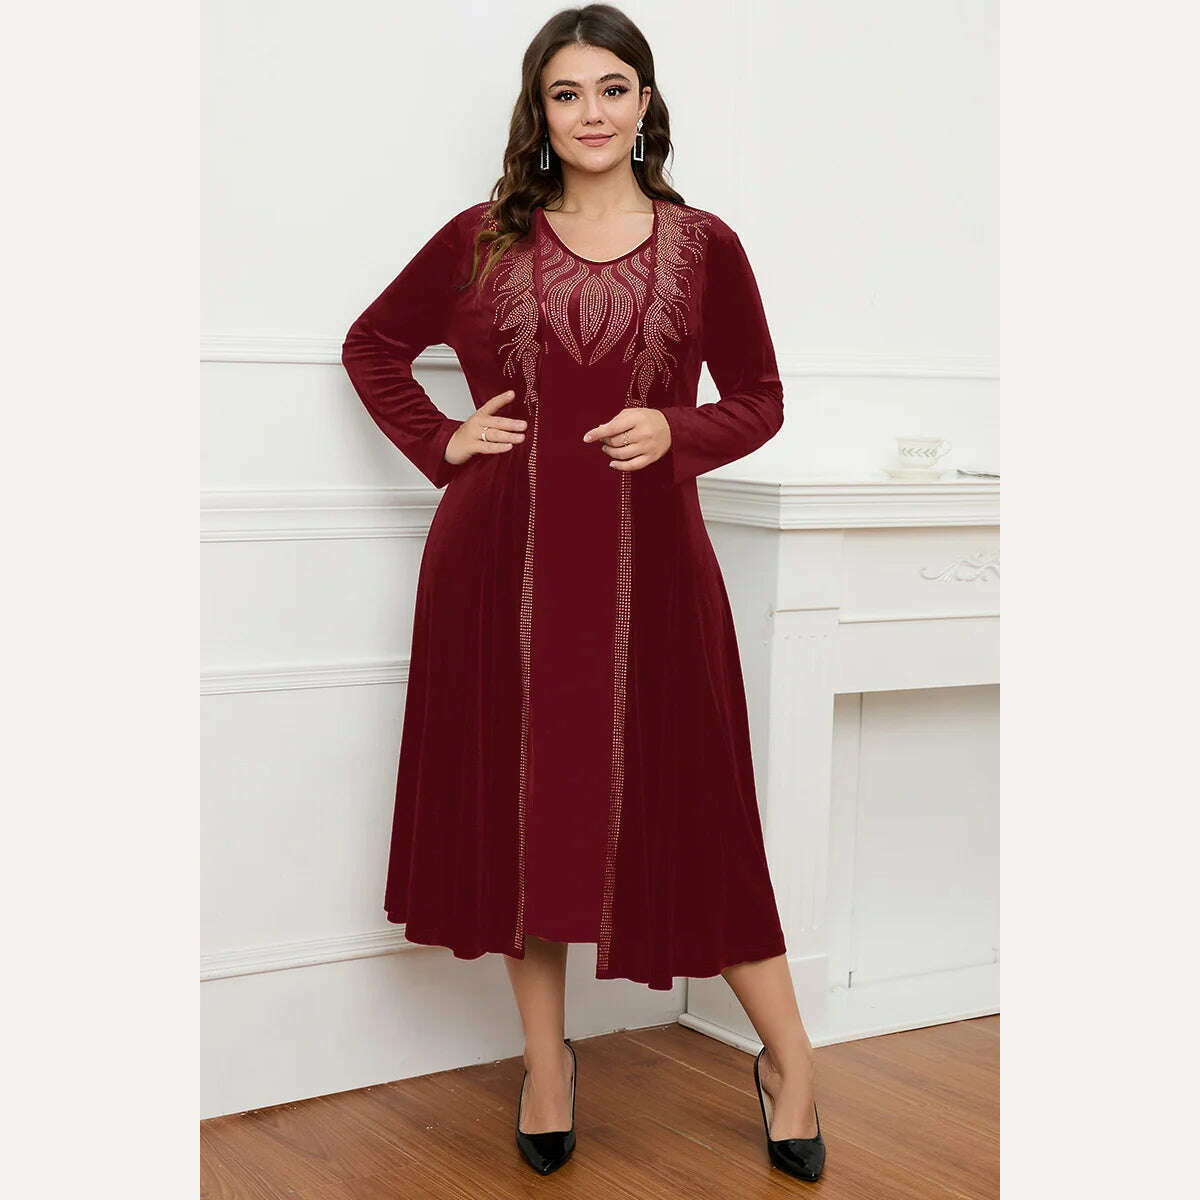 KIMLUD, Women's Plus Size Dress Two Piece Dress Set Velvet Autumn Printing Round Neck Casual Elegant Tank Dress and Long Jacket Outfit, Red / 5XL, KIMLUD Womens Clothes